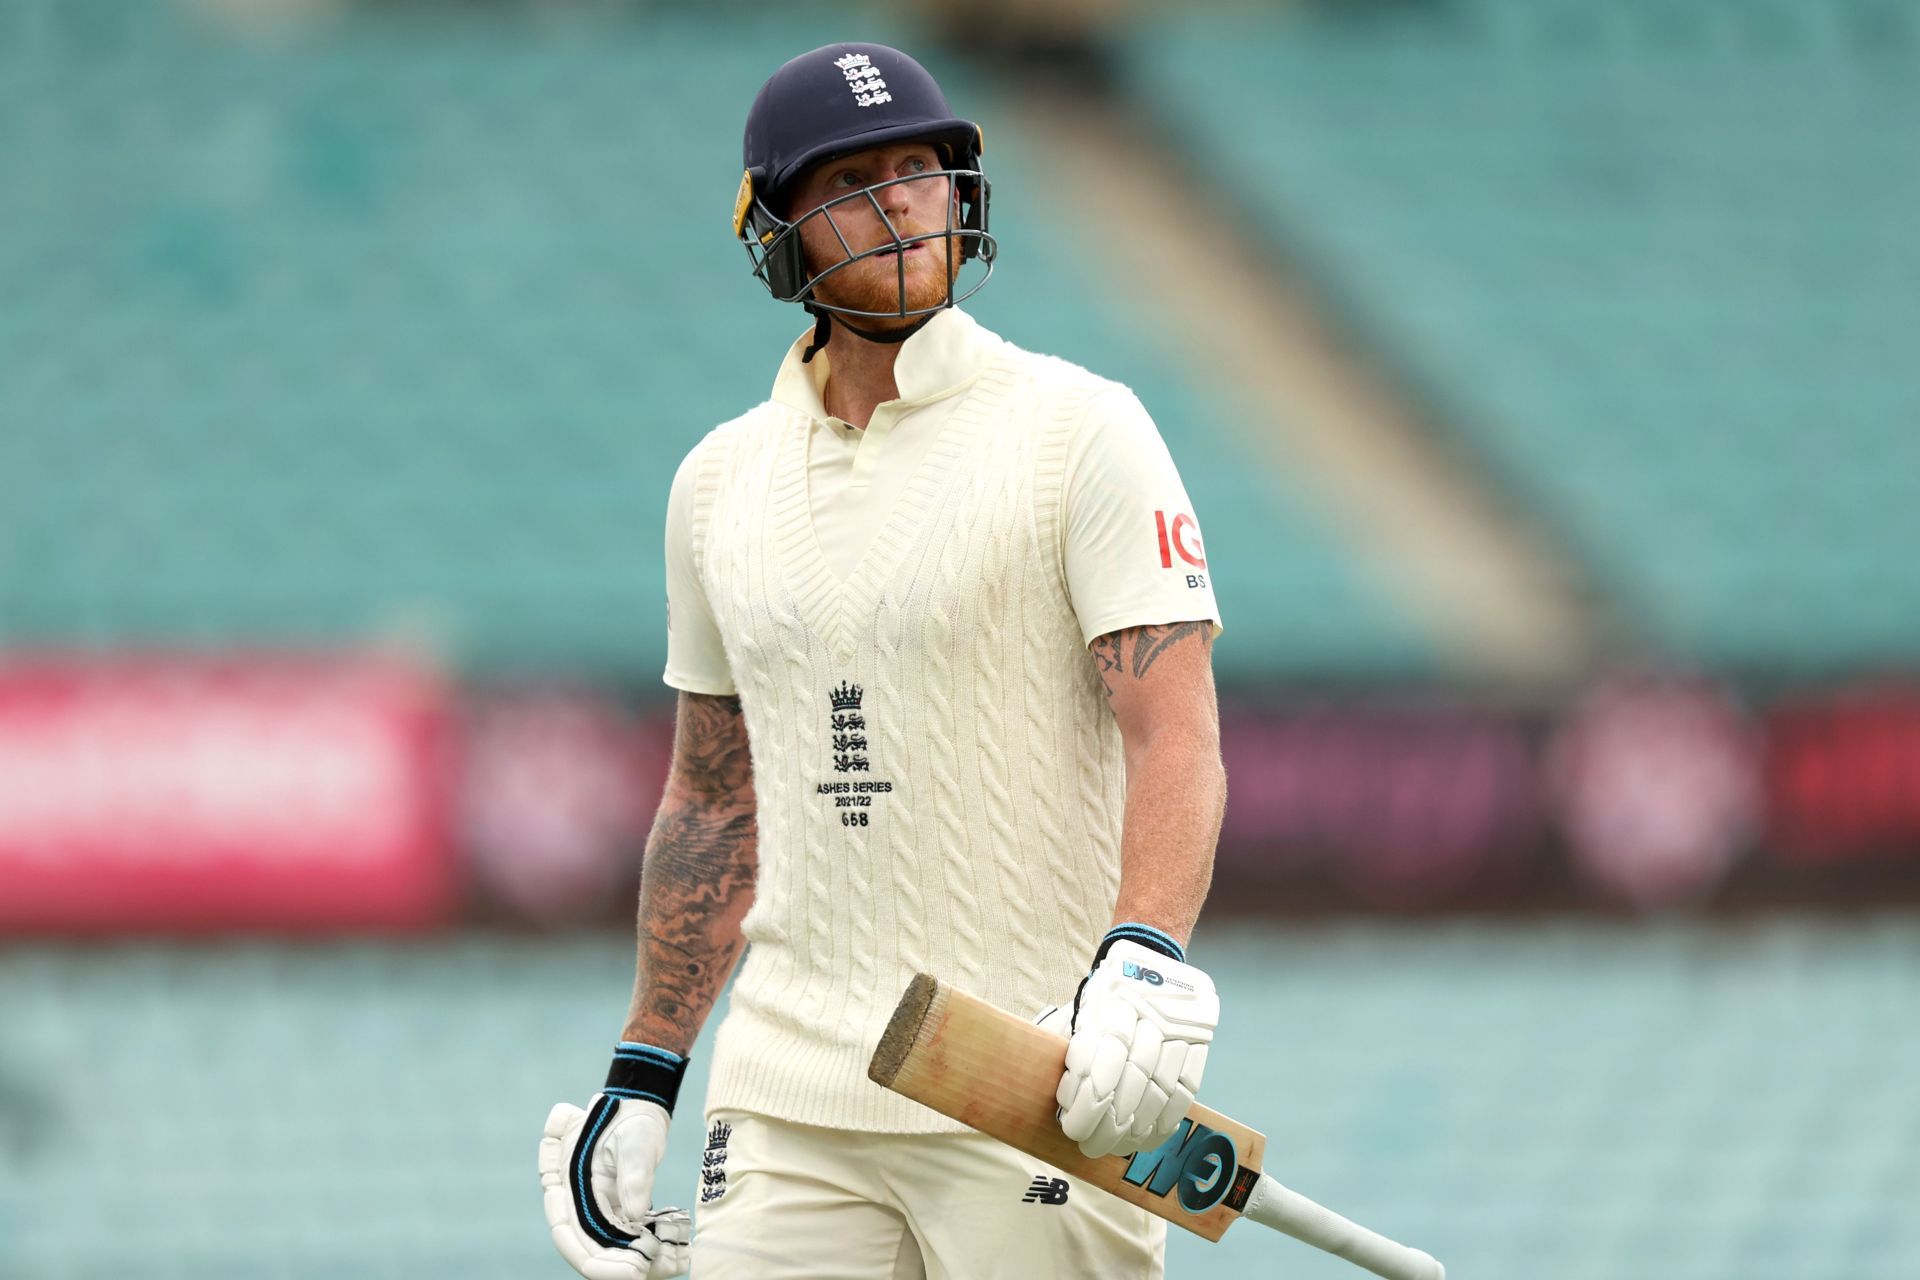 Ben Stokes played a crucial role as England pulled off a draw in Sydney (Credit: Getty Images)